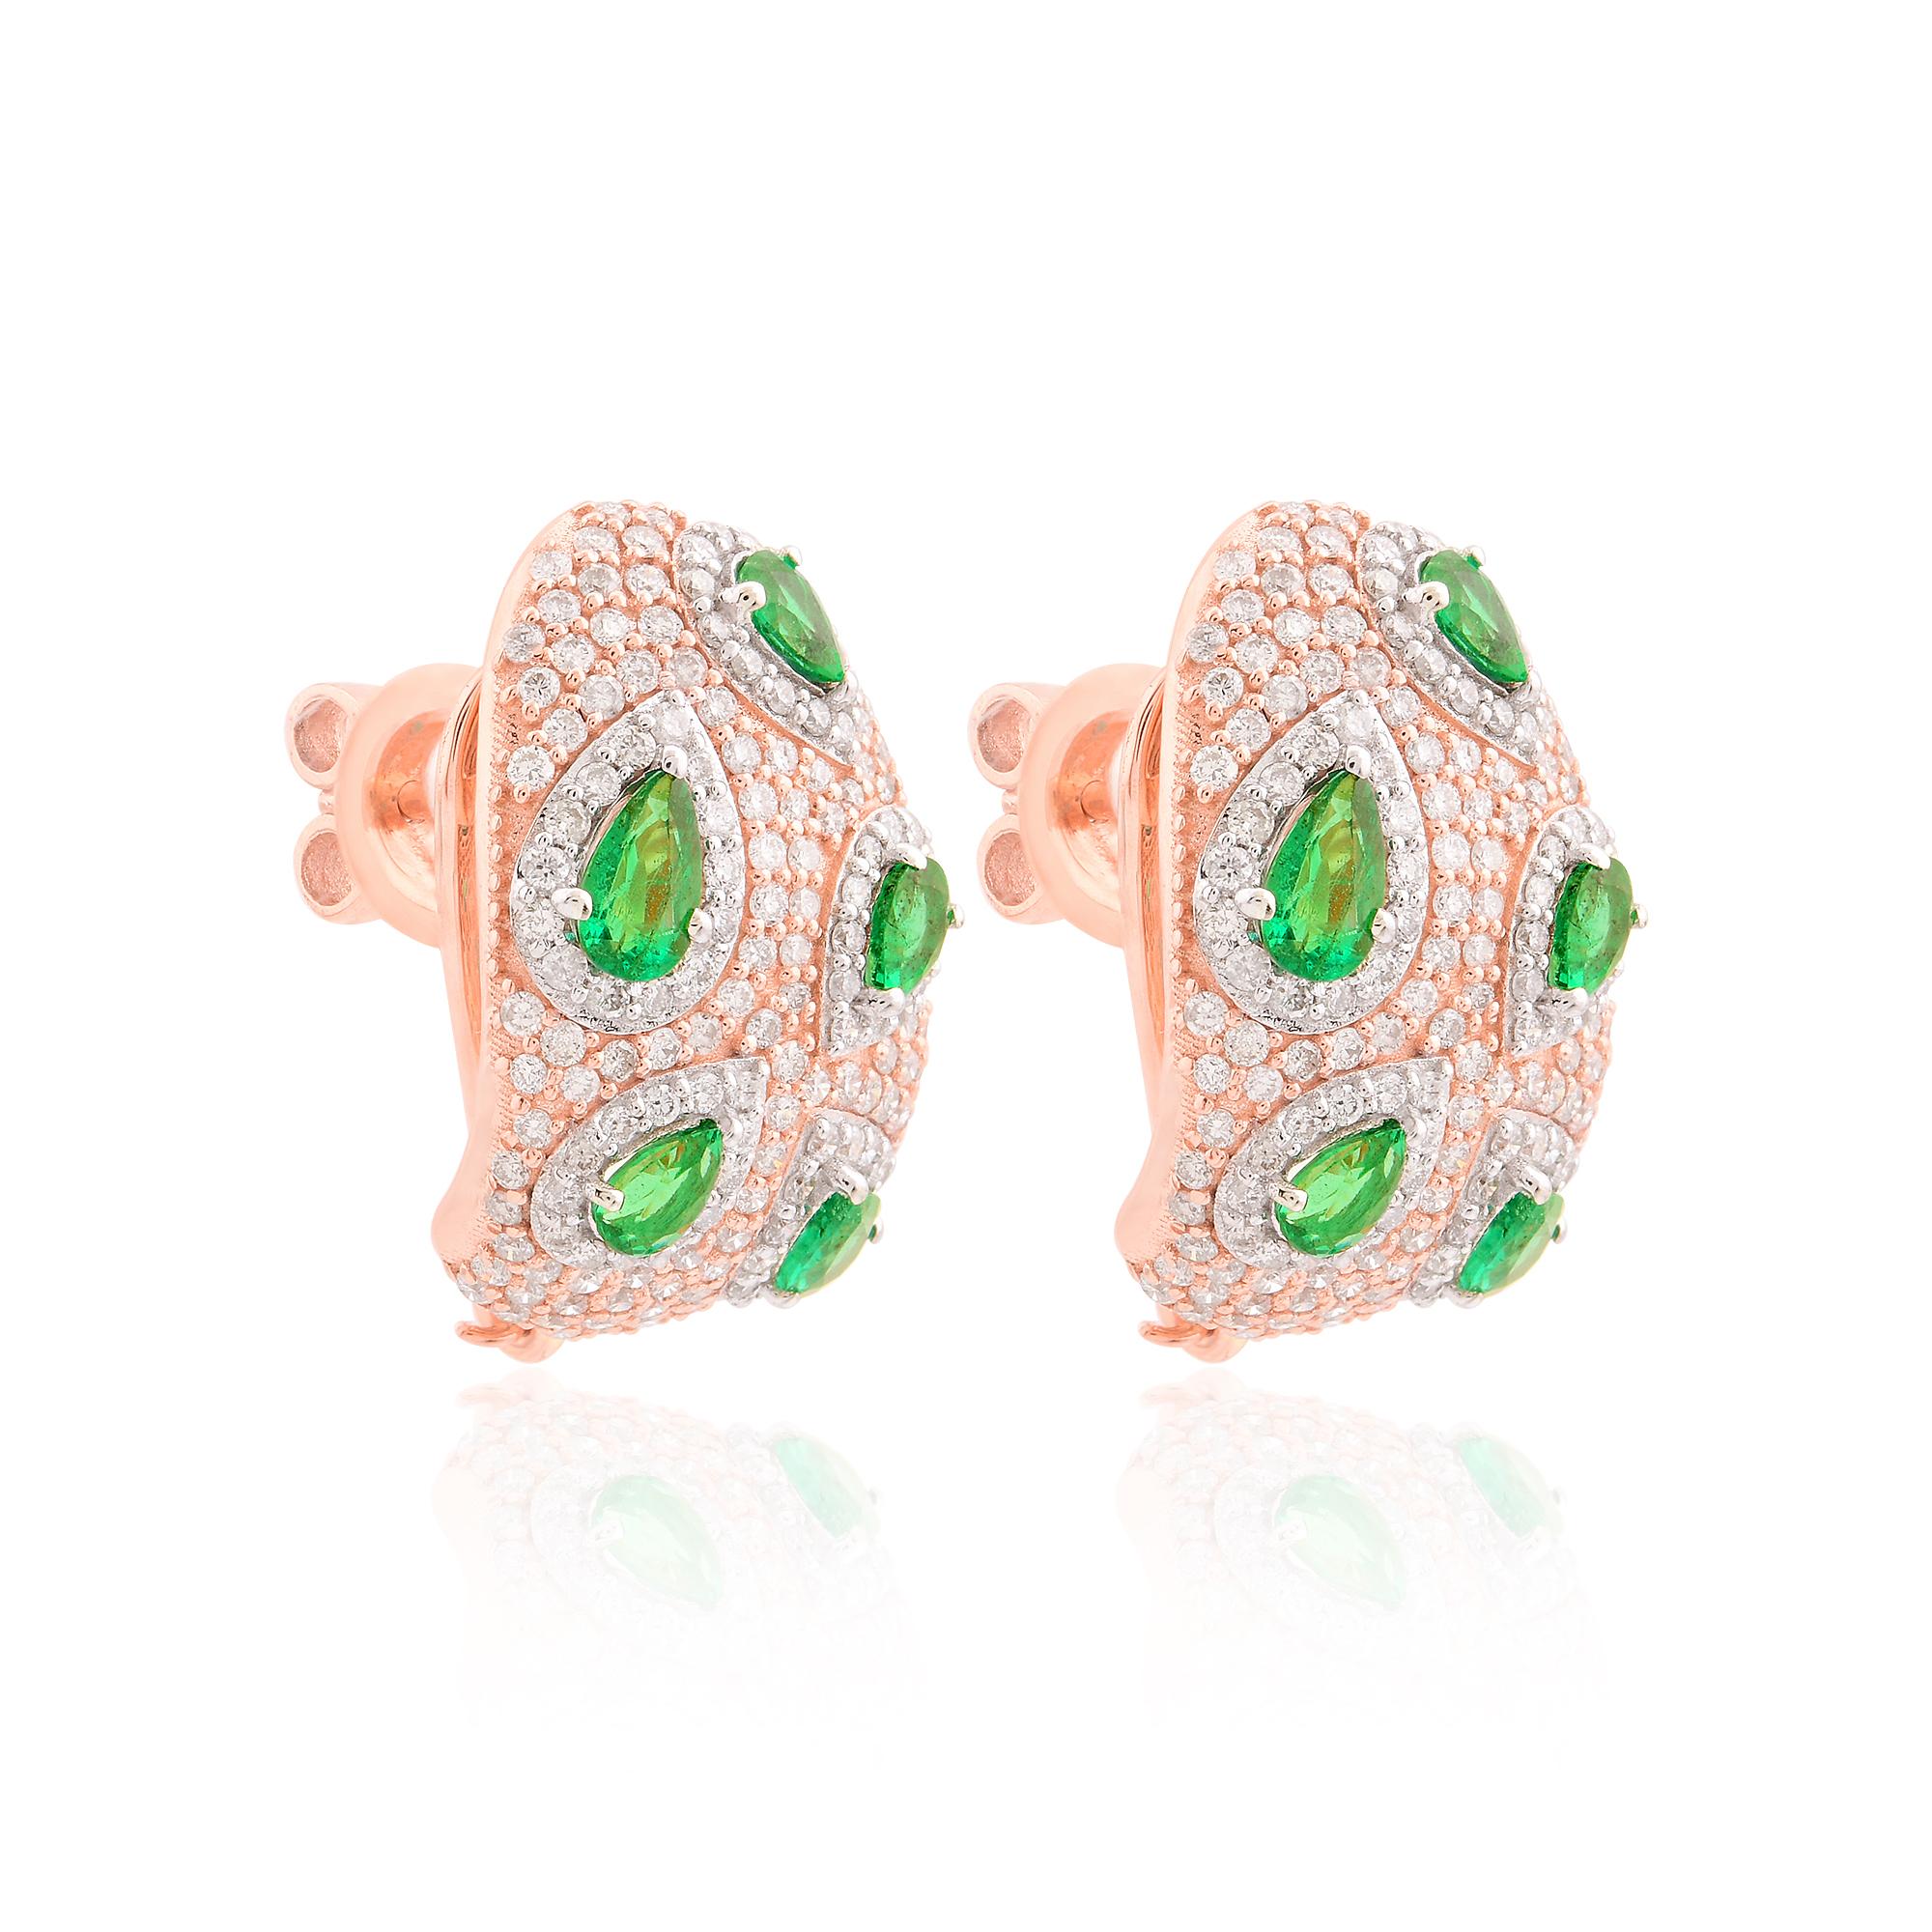 Item Code :- SEE-11693
Gross Wt. :- 8.38 gm
18k Rose Gold Wt. :- 7.81 gm
Natural Diamond Wt. :- 1.60 Ct. ( AVERAGE DIAMOND CLARITY SI1-SI2 & COLOR H-I )
Zambian Emerald Wt. :- 1.26 Ct.
Earrings Size :- 20 x 12 mm approx.

✦